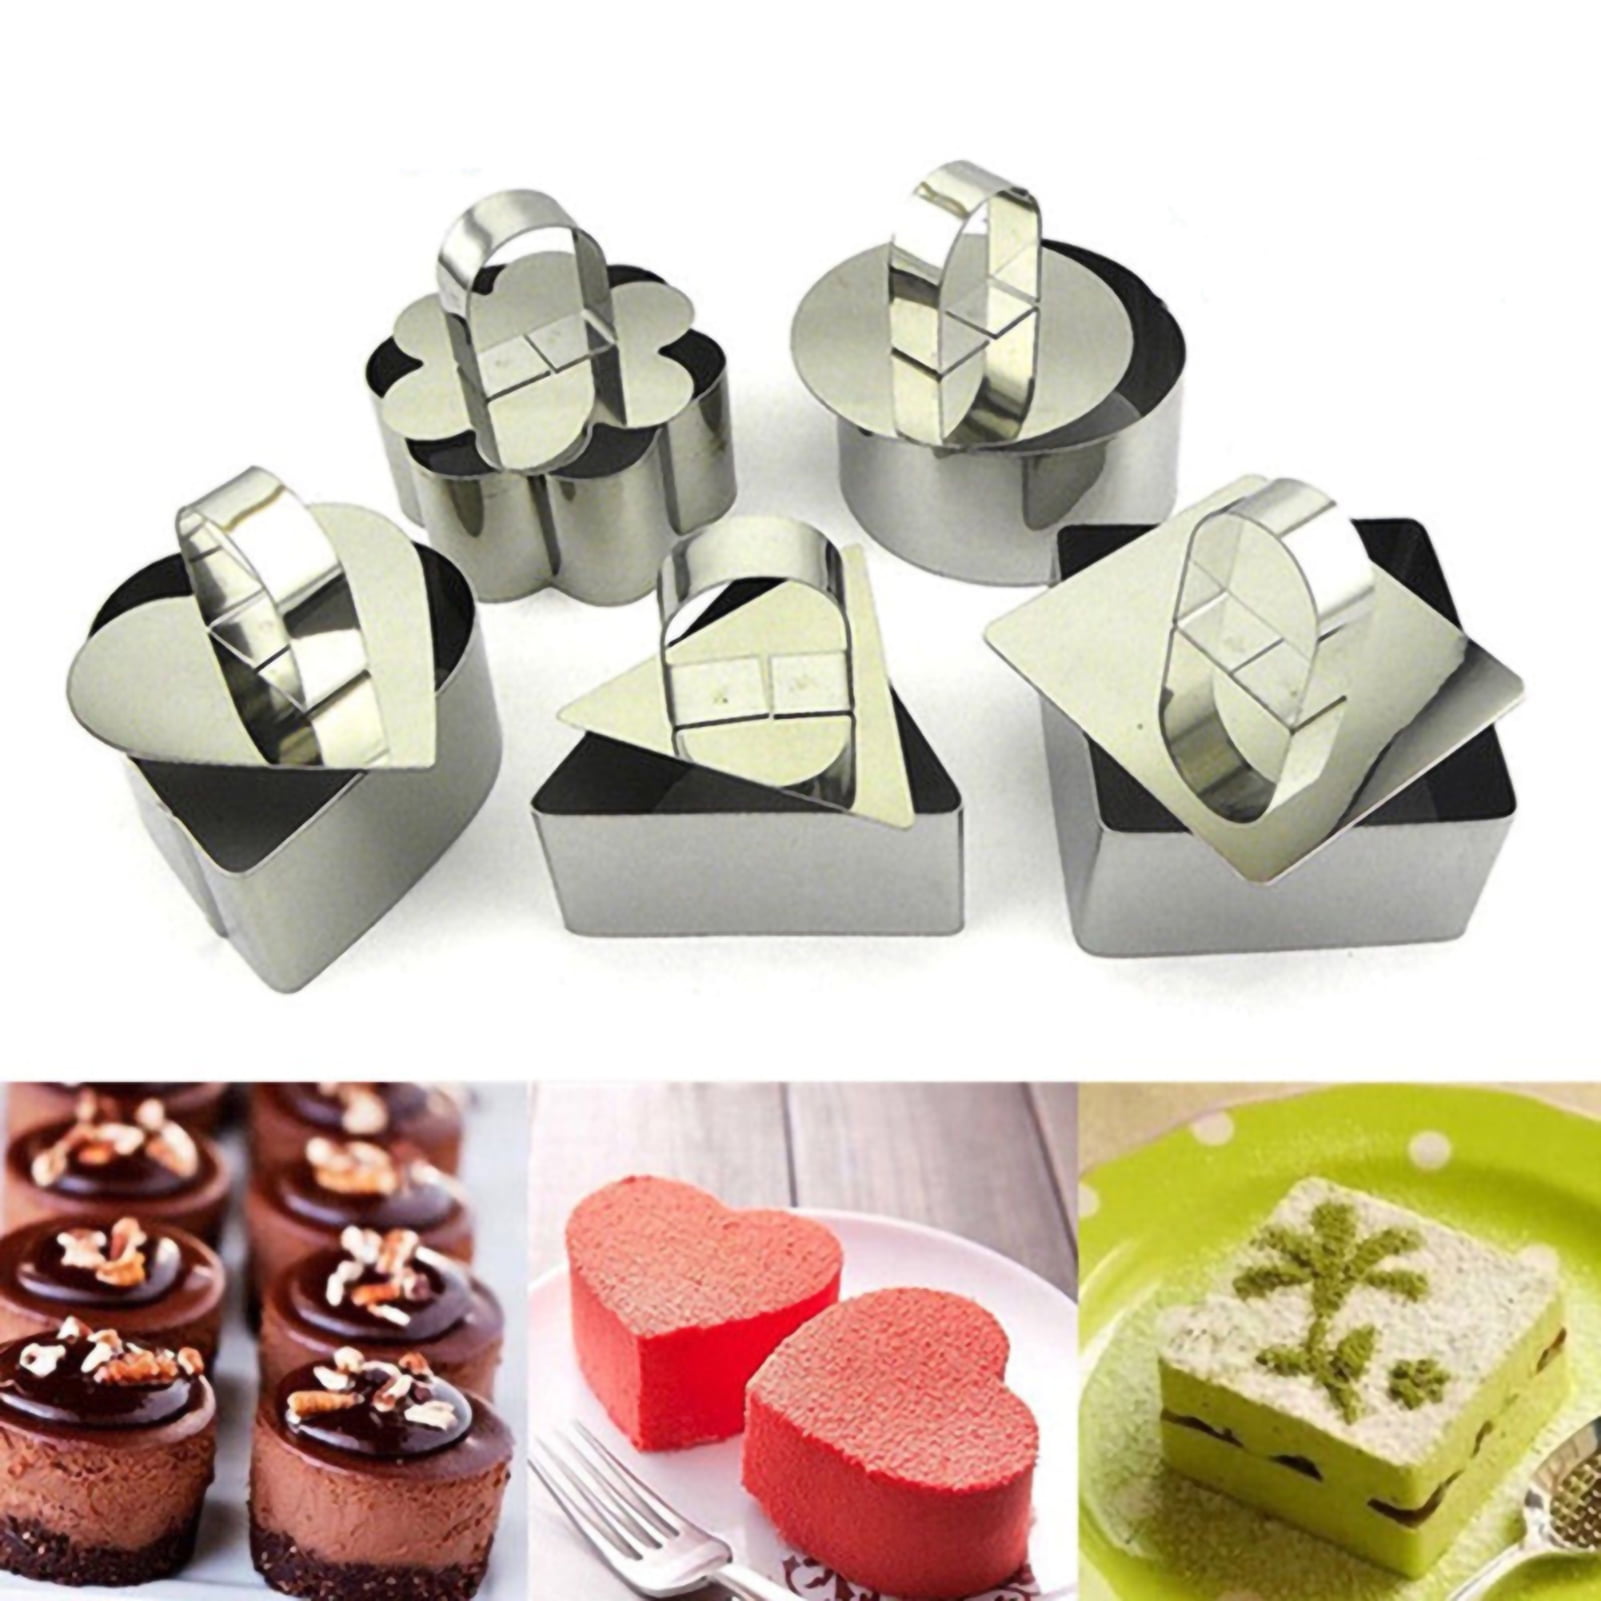 Stainless Steel Biscuit Pastry Cookie Cutter Cake Decor Baking Mold Mould Tools 